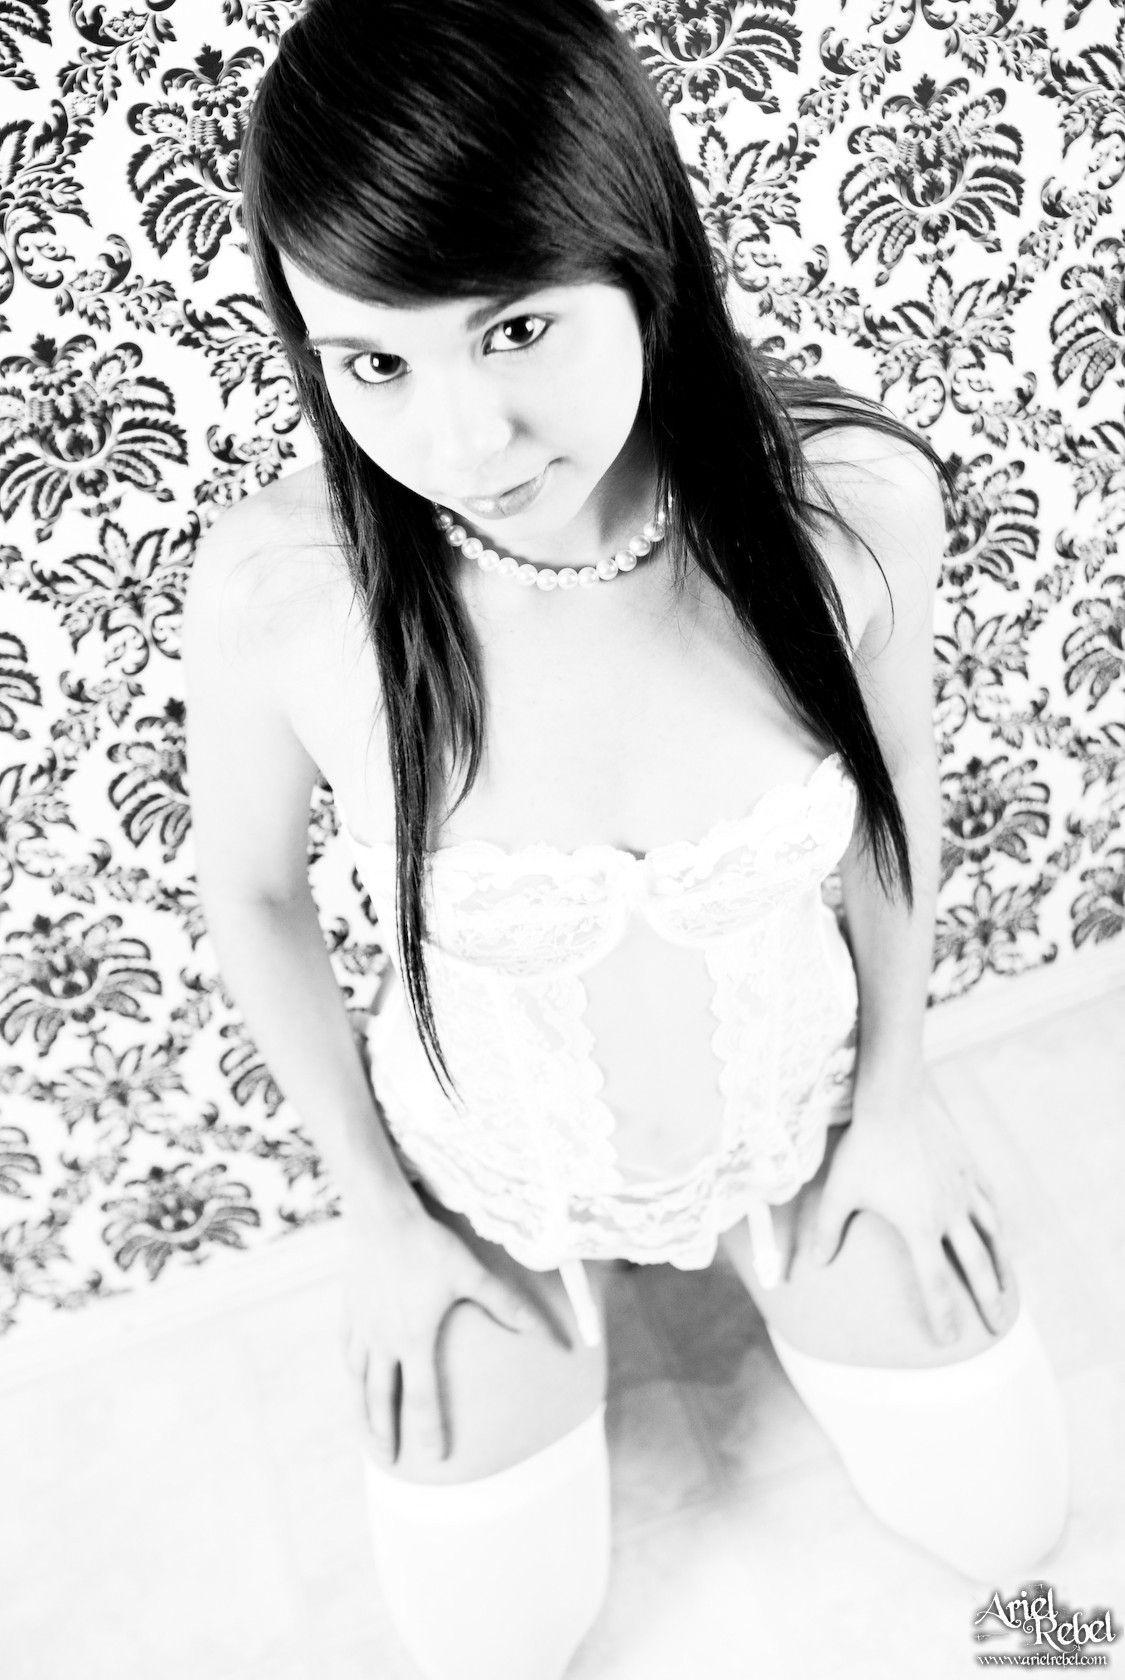 Pictures Of Ariel Rebel Looking Vintage In Black And White Porn